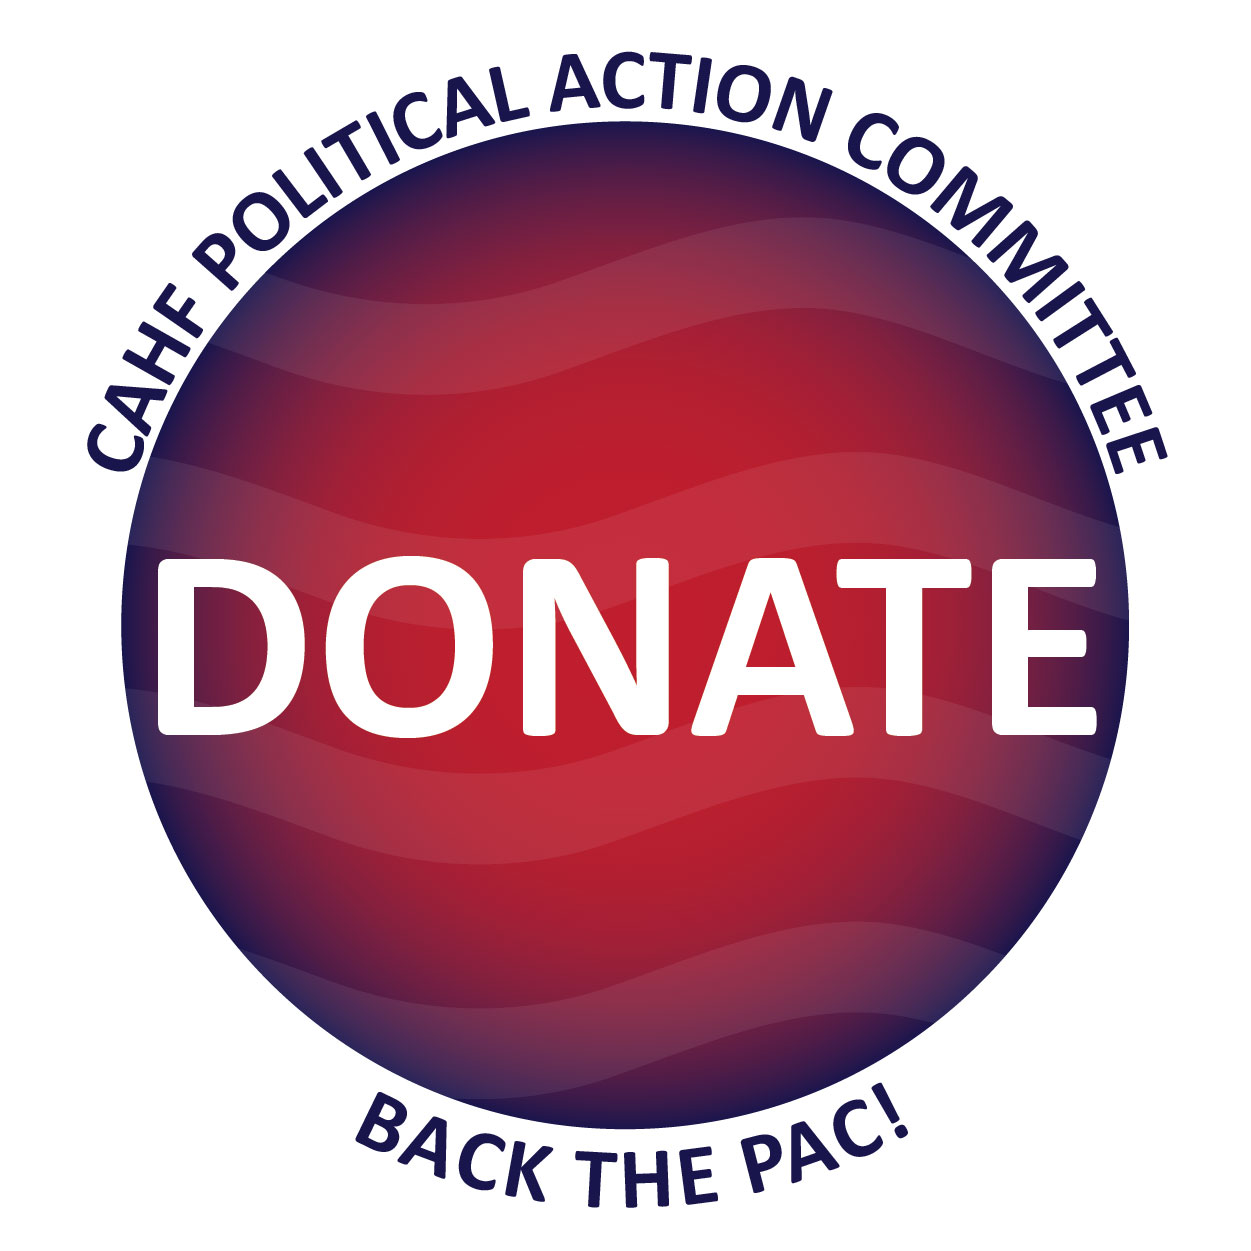 CAHF PAC - Contribute to Candidate Campaigns